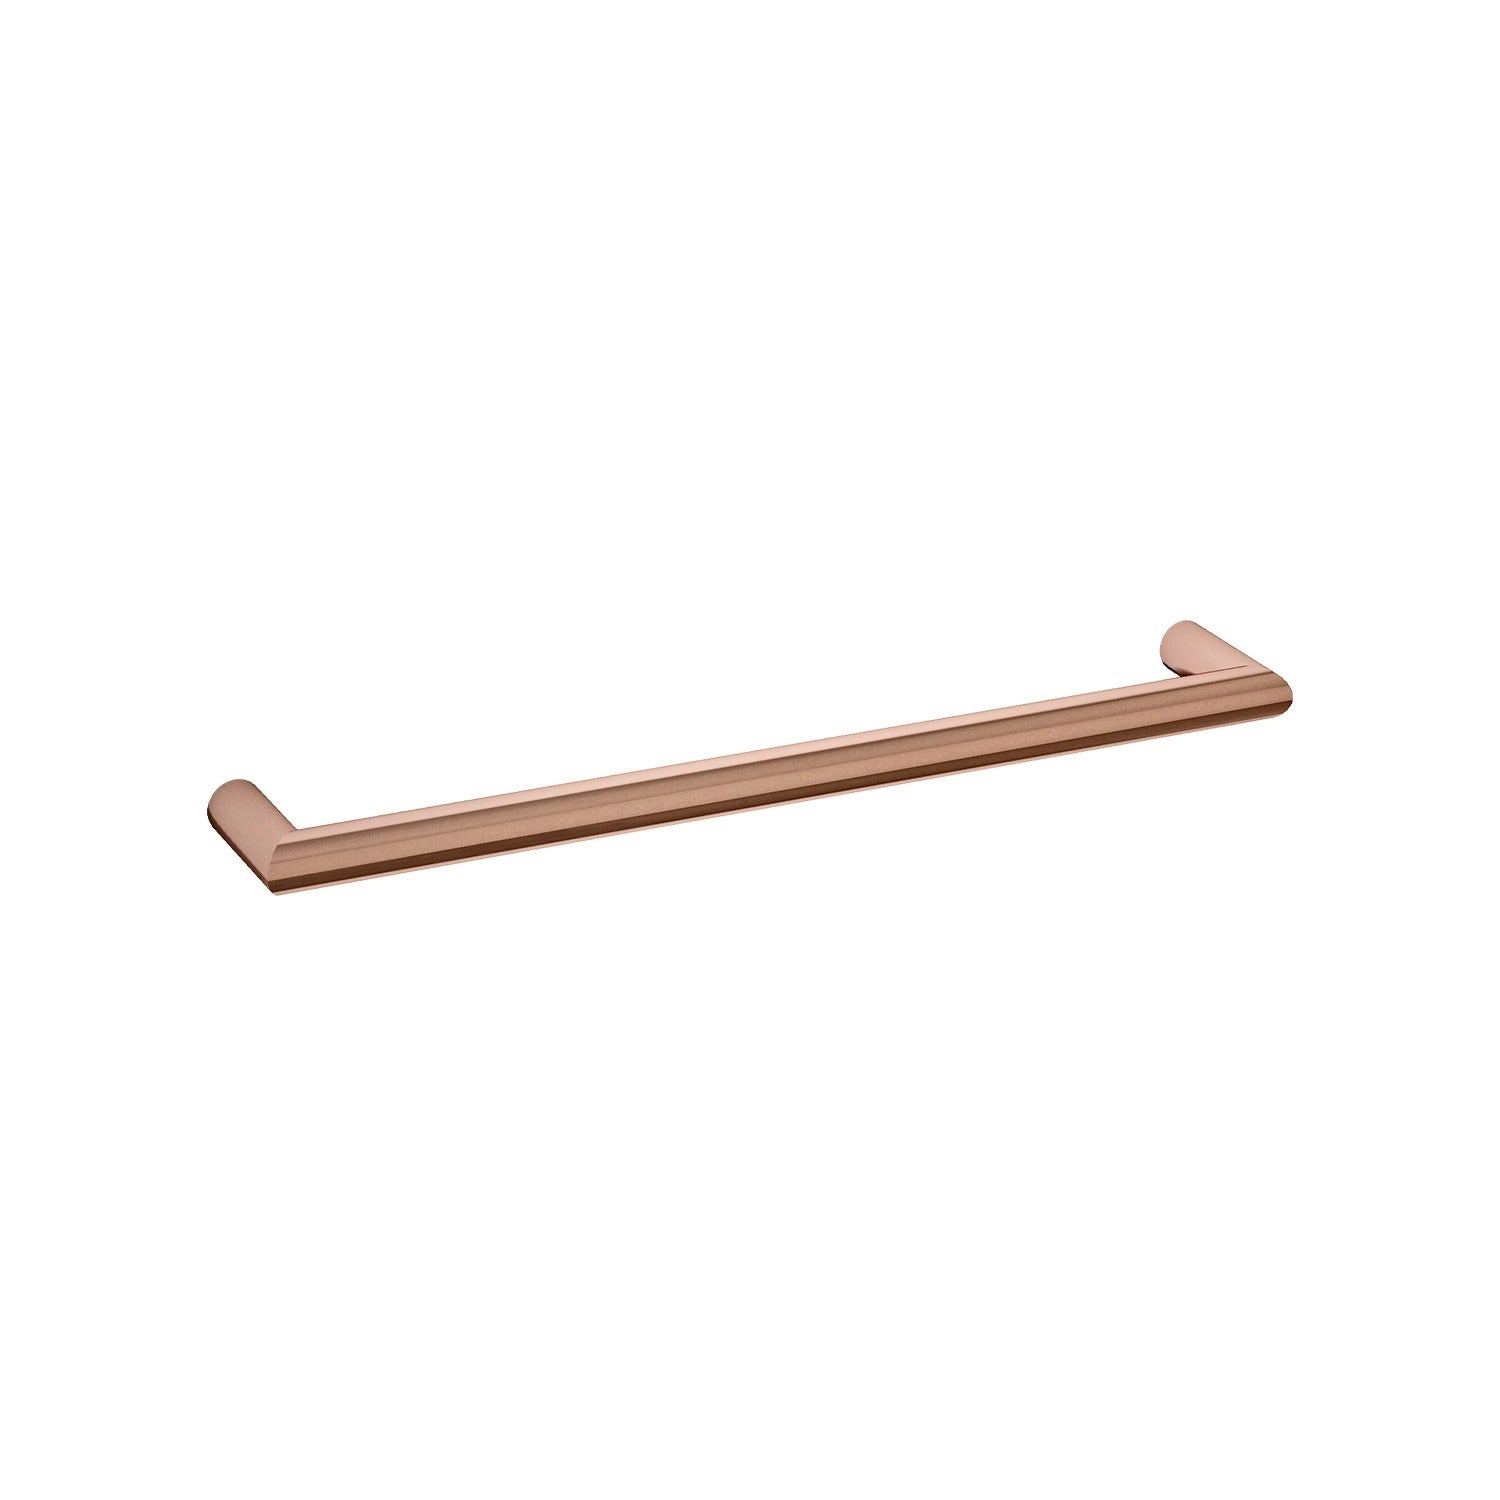 THERMOGROUP ROSE GOLD ROUND SINGLE BAR HEATED TOWEL RAIL 600MM